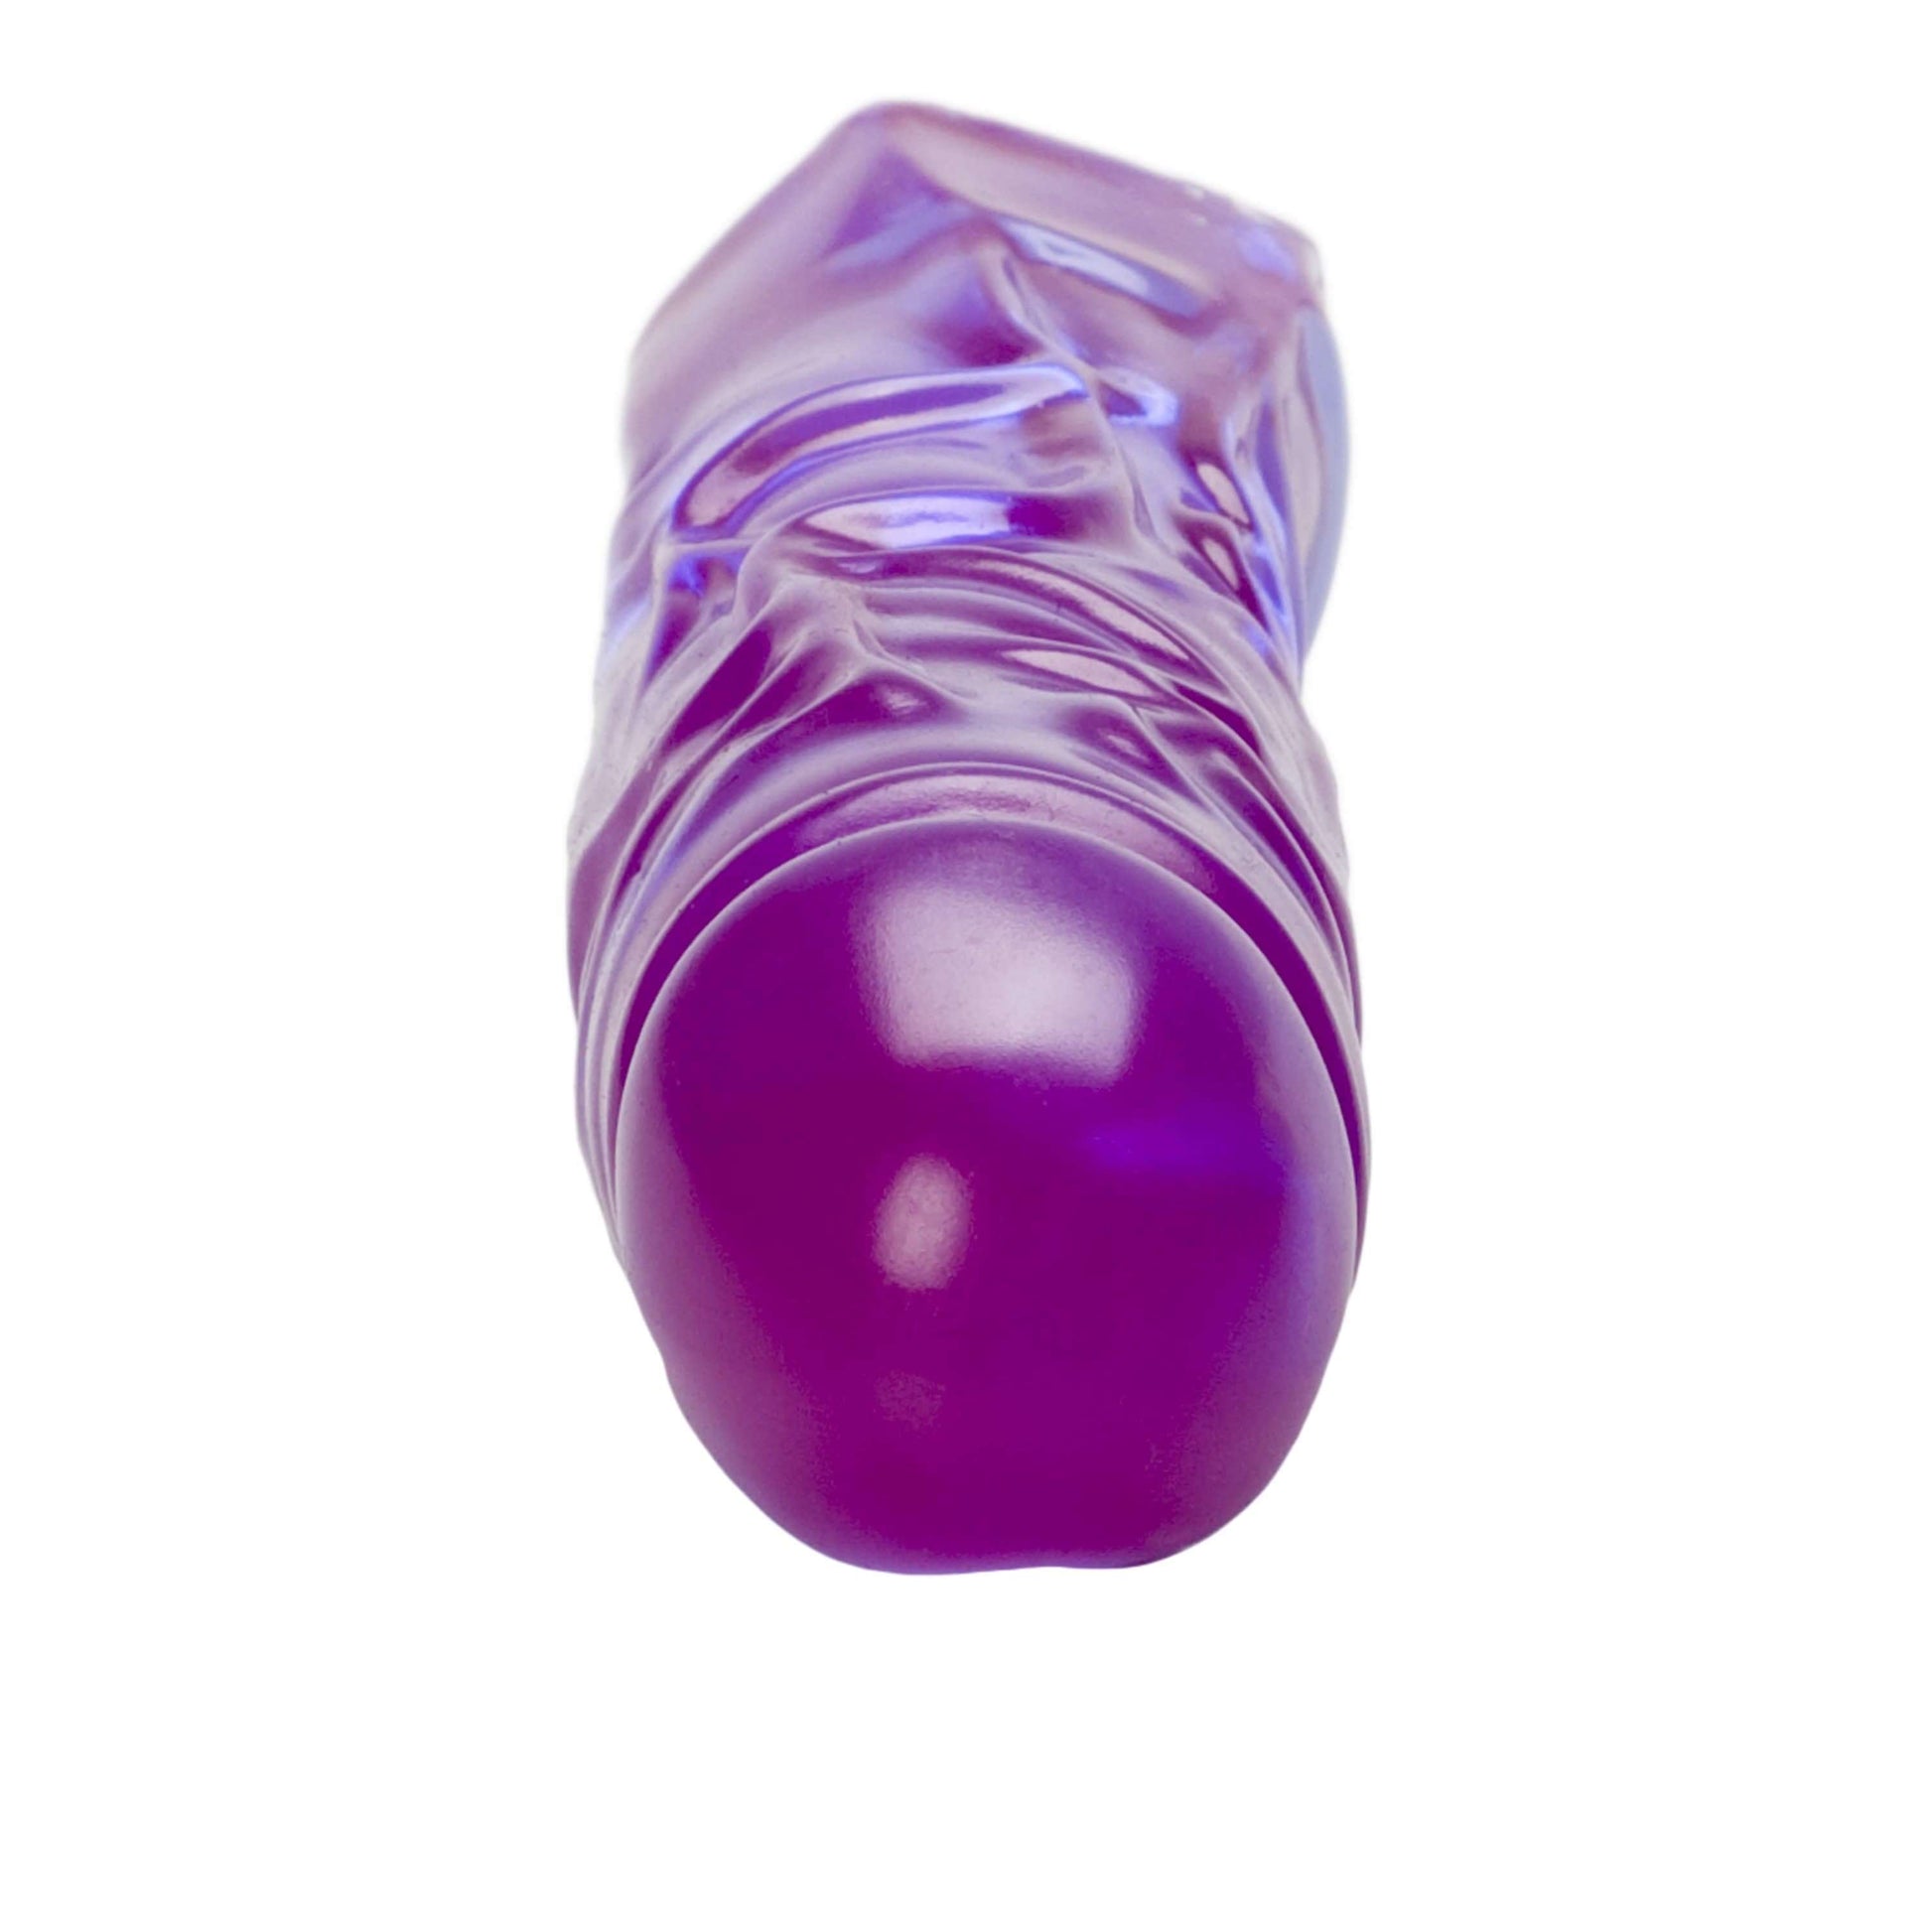 Reflective Gel 8.5" Veined Chubby - Thorn & Feather Sex Toy Canada